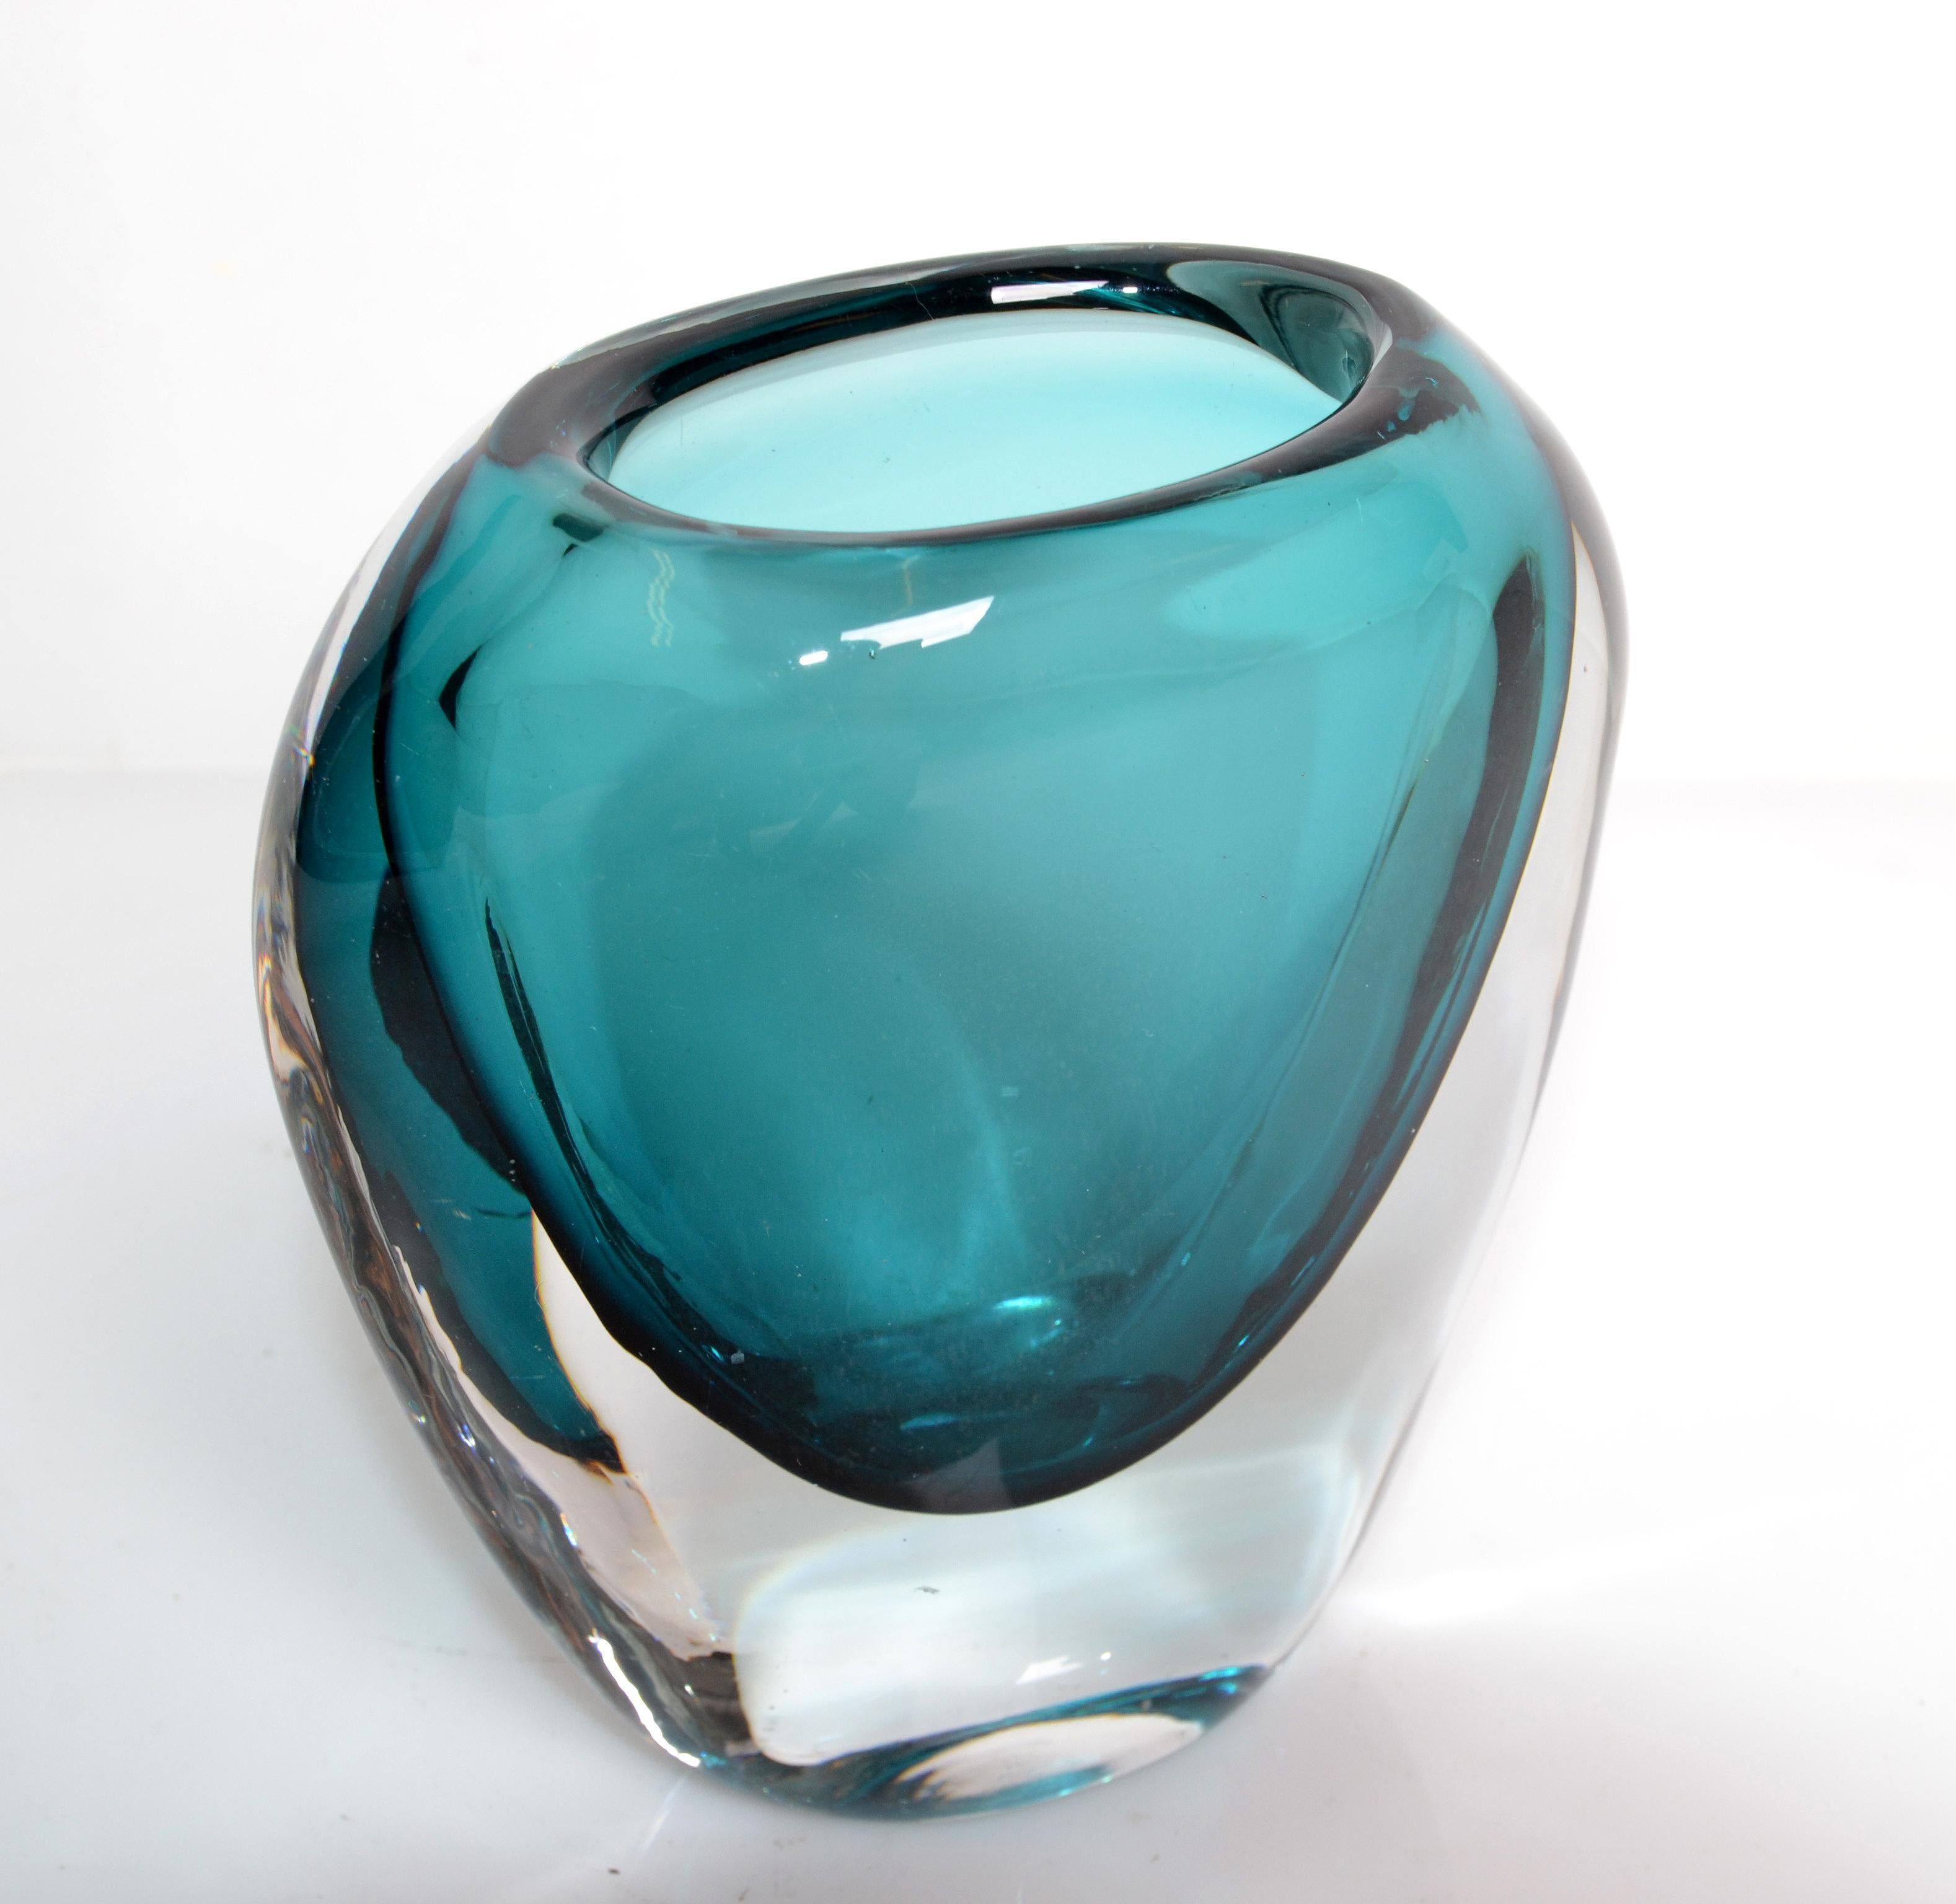 Murano blown art glass vase in turquoise blue and transparent glass from Italy.
The opening with 2.25 x 1.5 inches width is for a little bouquet.
Mid-Century Modern unique glass art very elegant and practical.